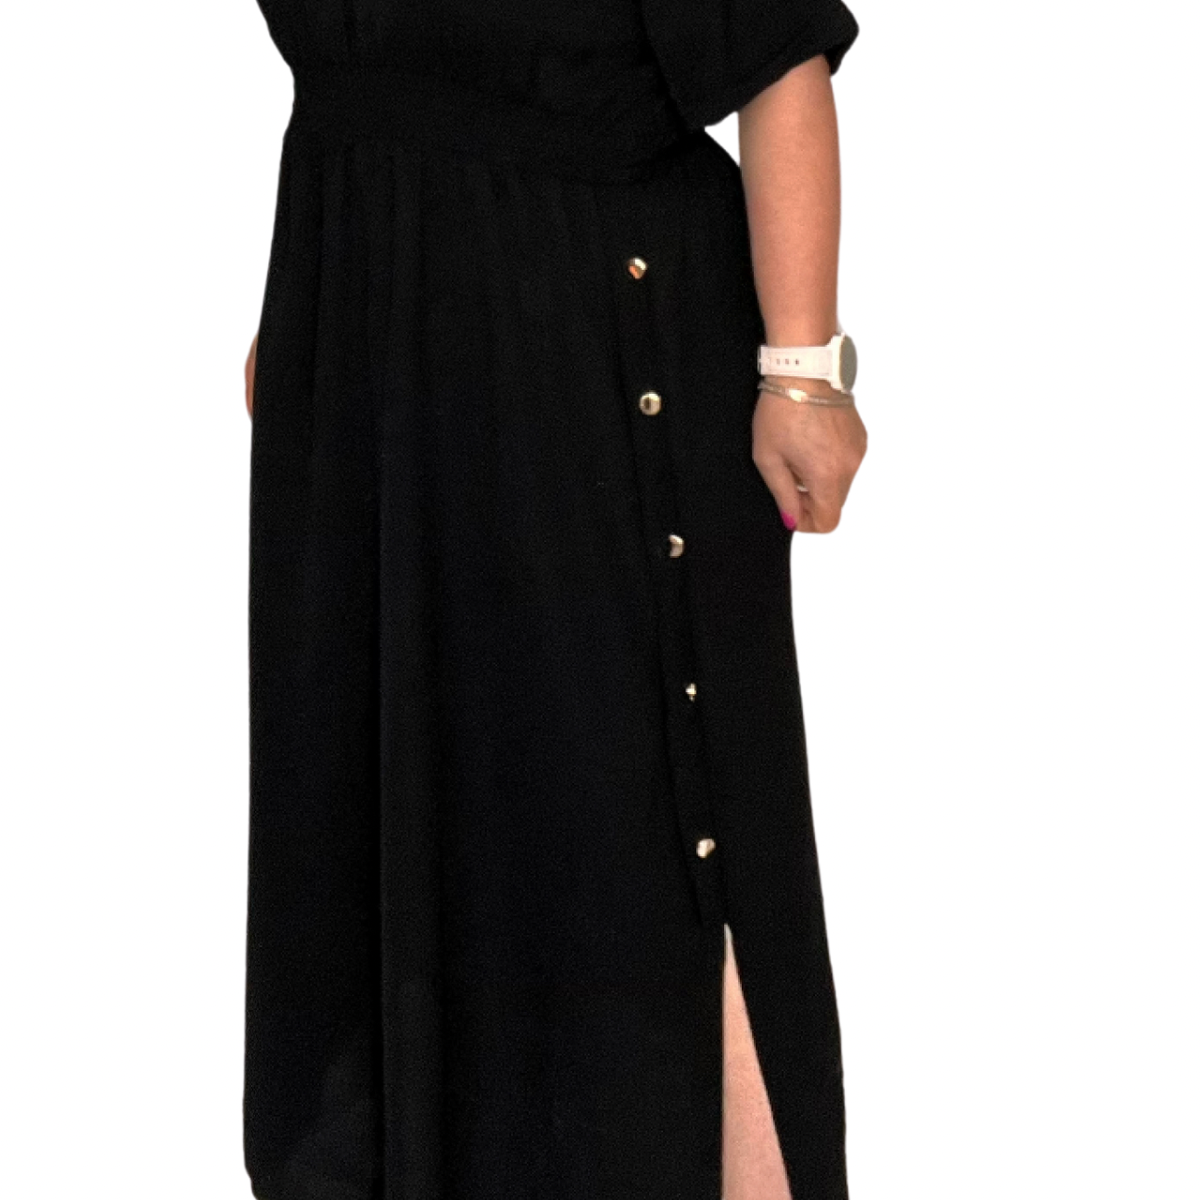 FEATURE BUTTON SHIRT DRESS WITH COLLAR AND ELASTIC WAIST